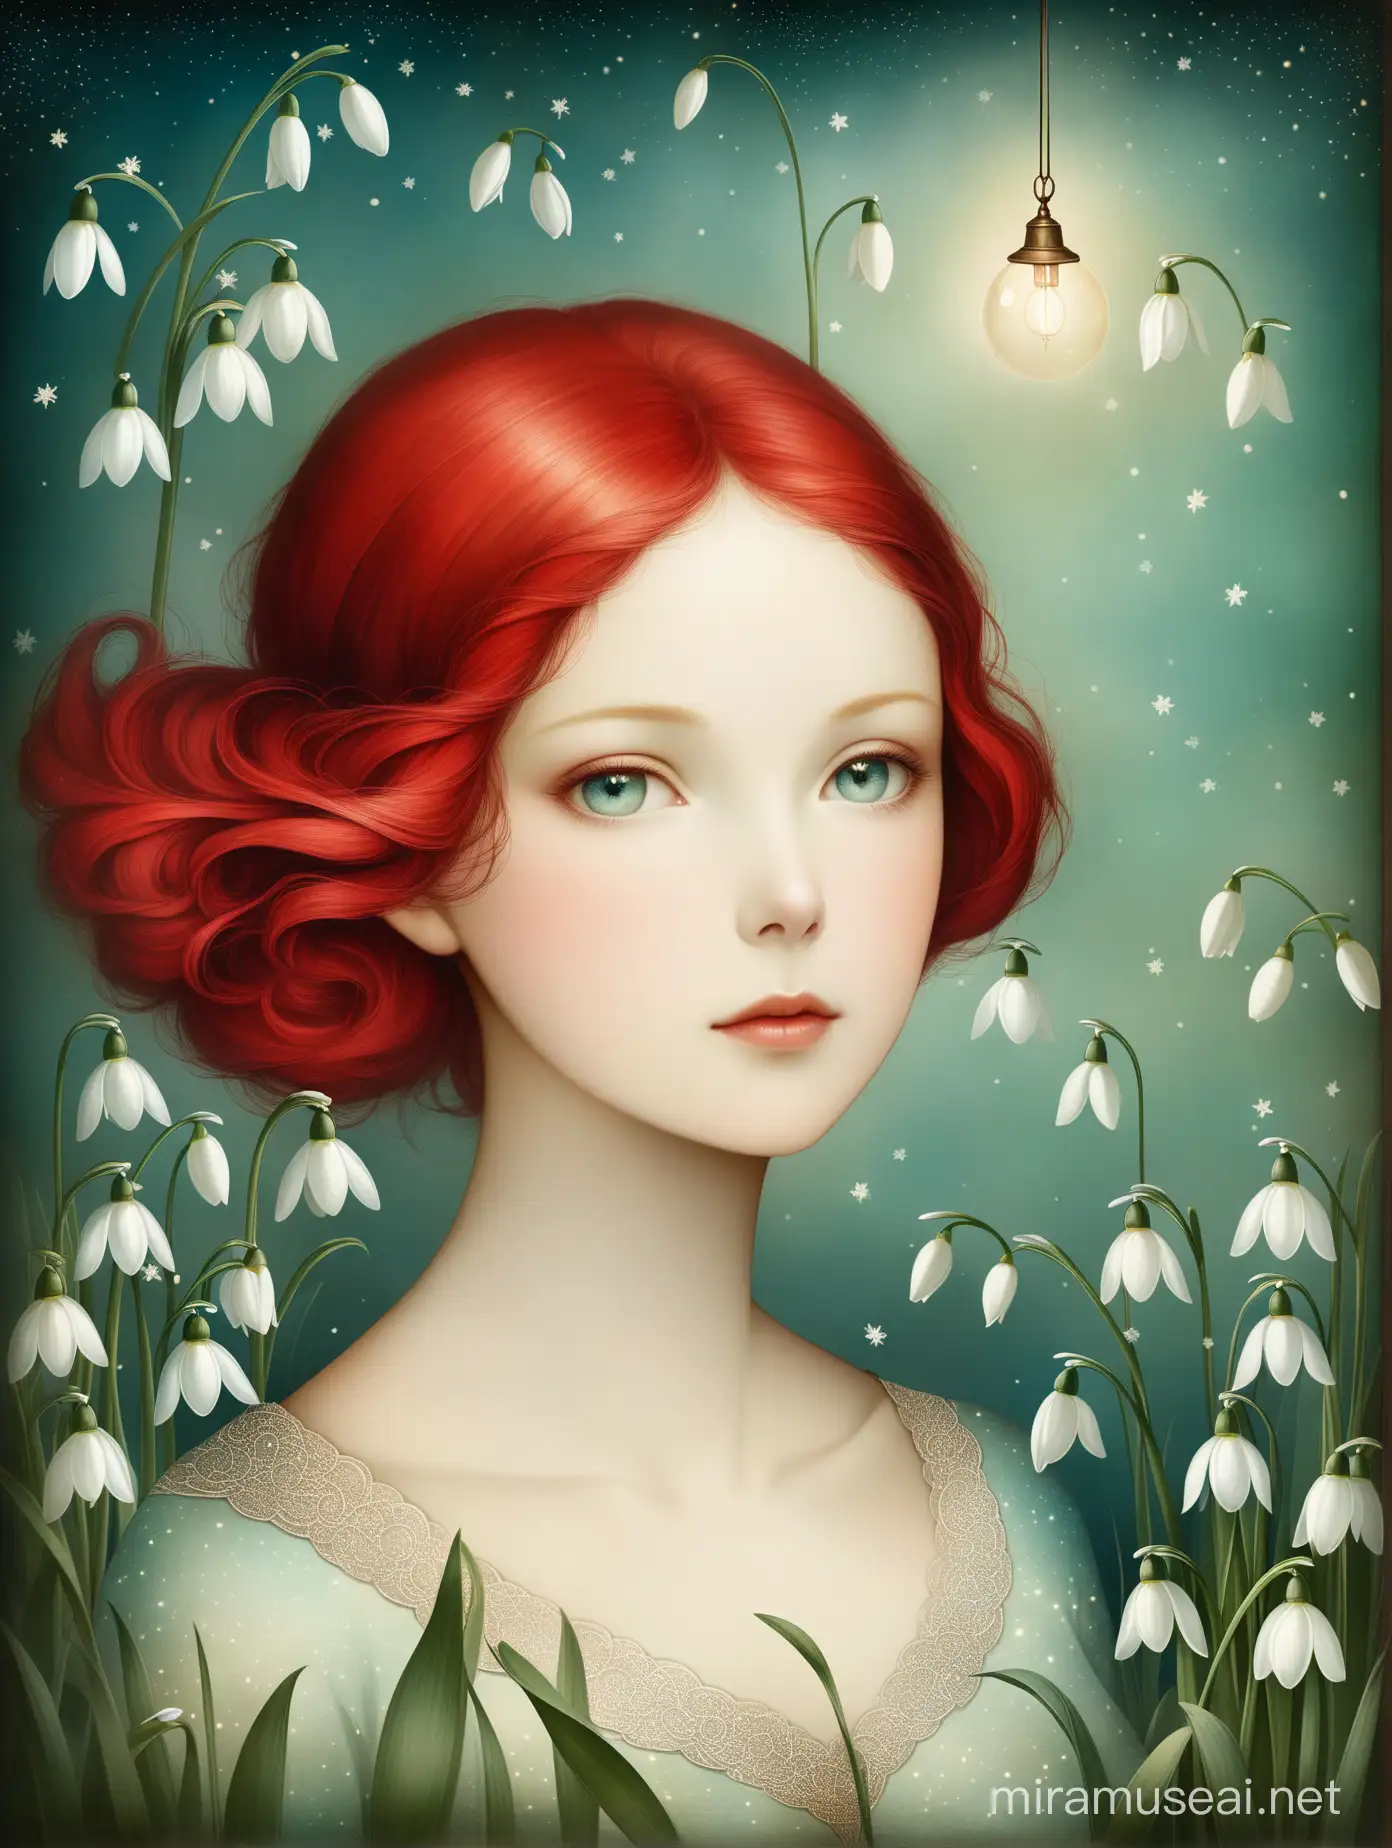 Enchanting RedHaired Woman Surrounded by Snowdrops Fantasy Portrait